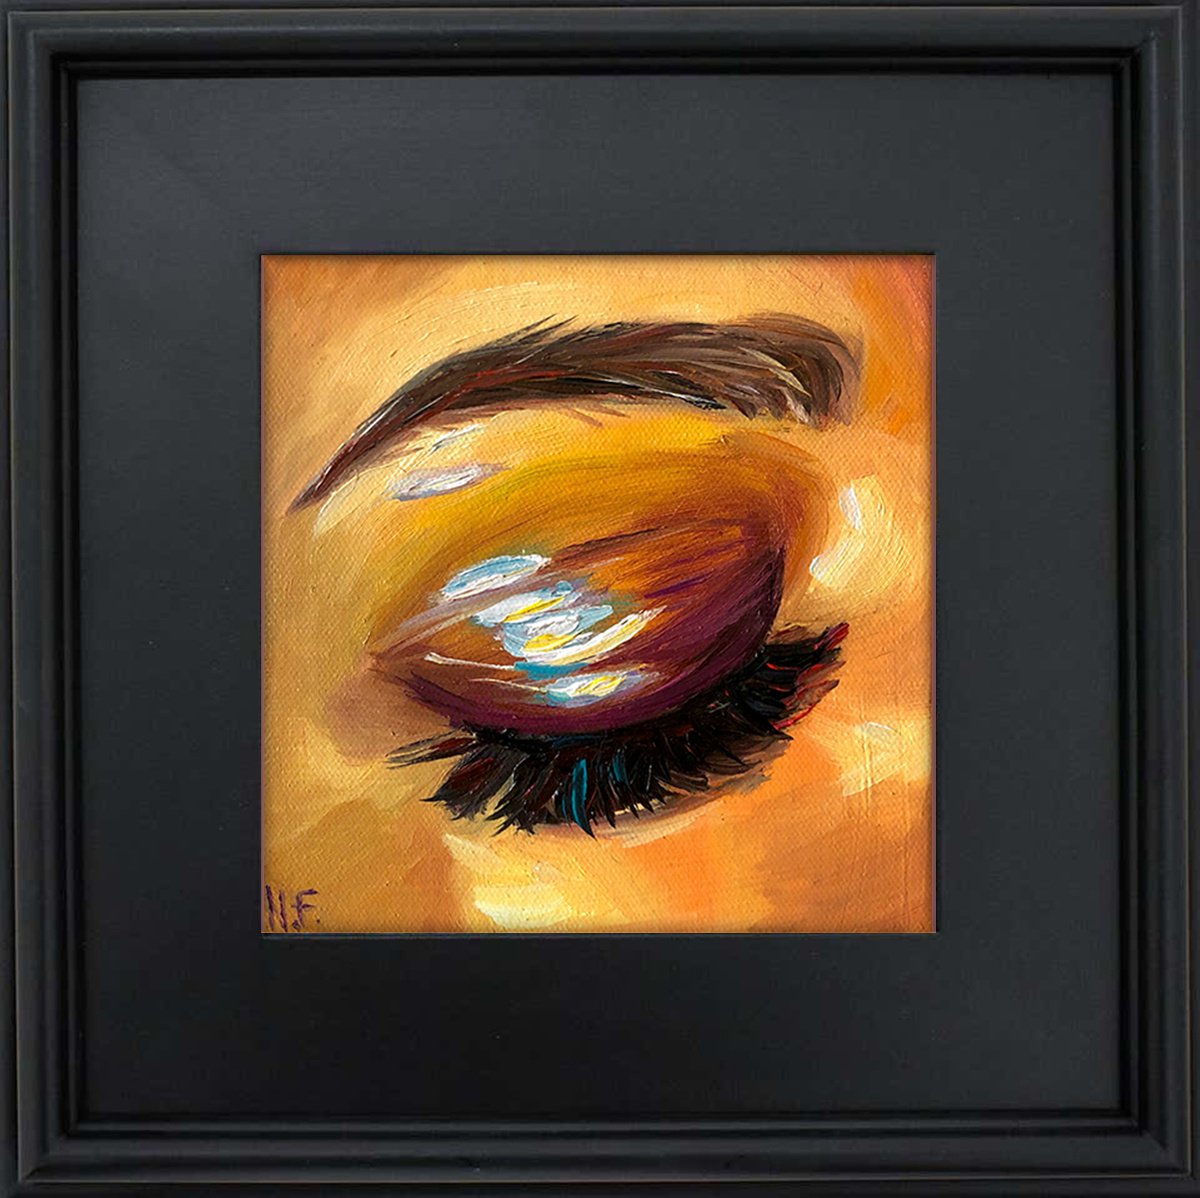 GLOSSY EYESHADOW, Original Mini Impressionist Square Oil Painting by Nastia Fortune